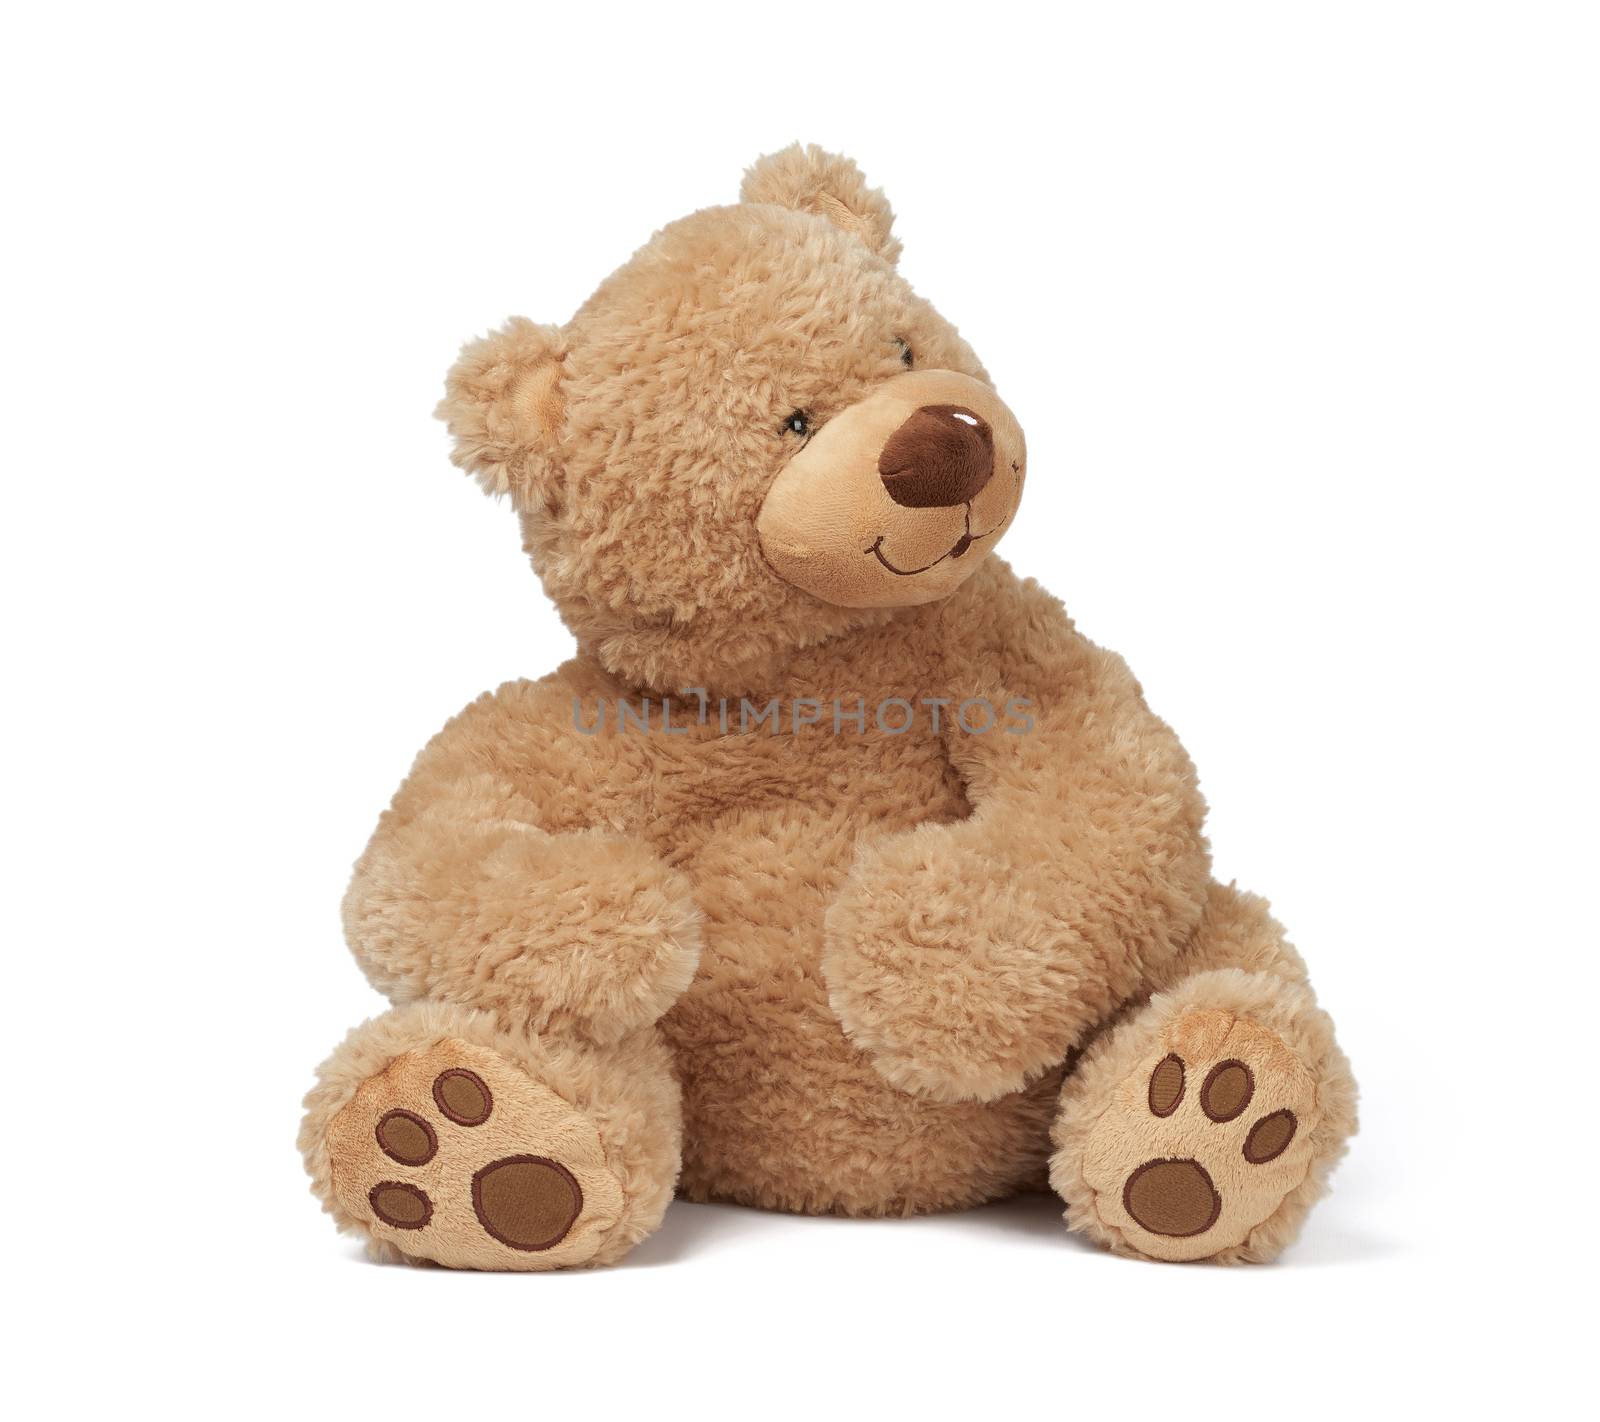 big curly brown teddy bear sits on a white isolated background, funny children`s toy